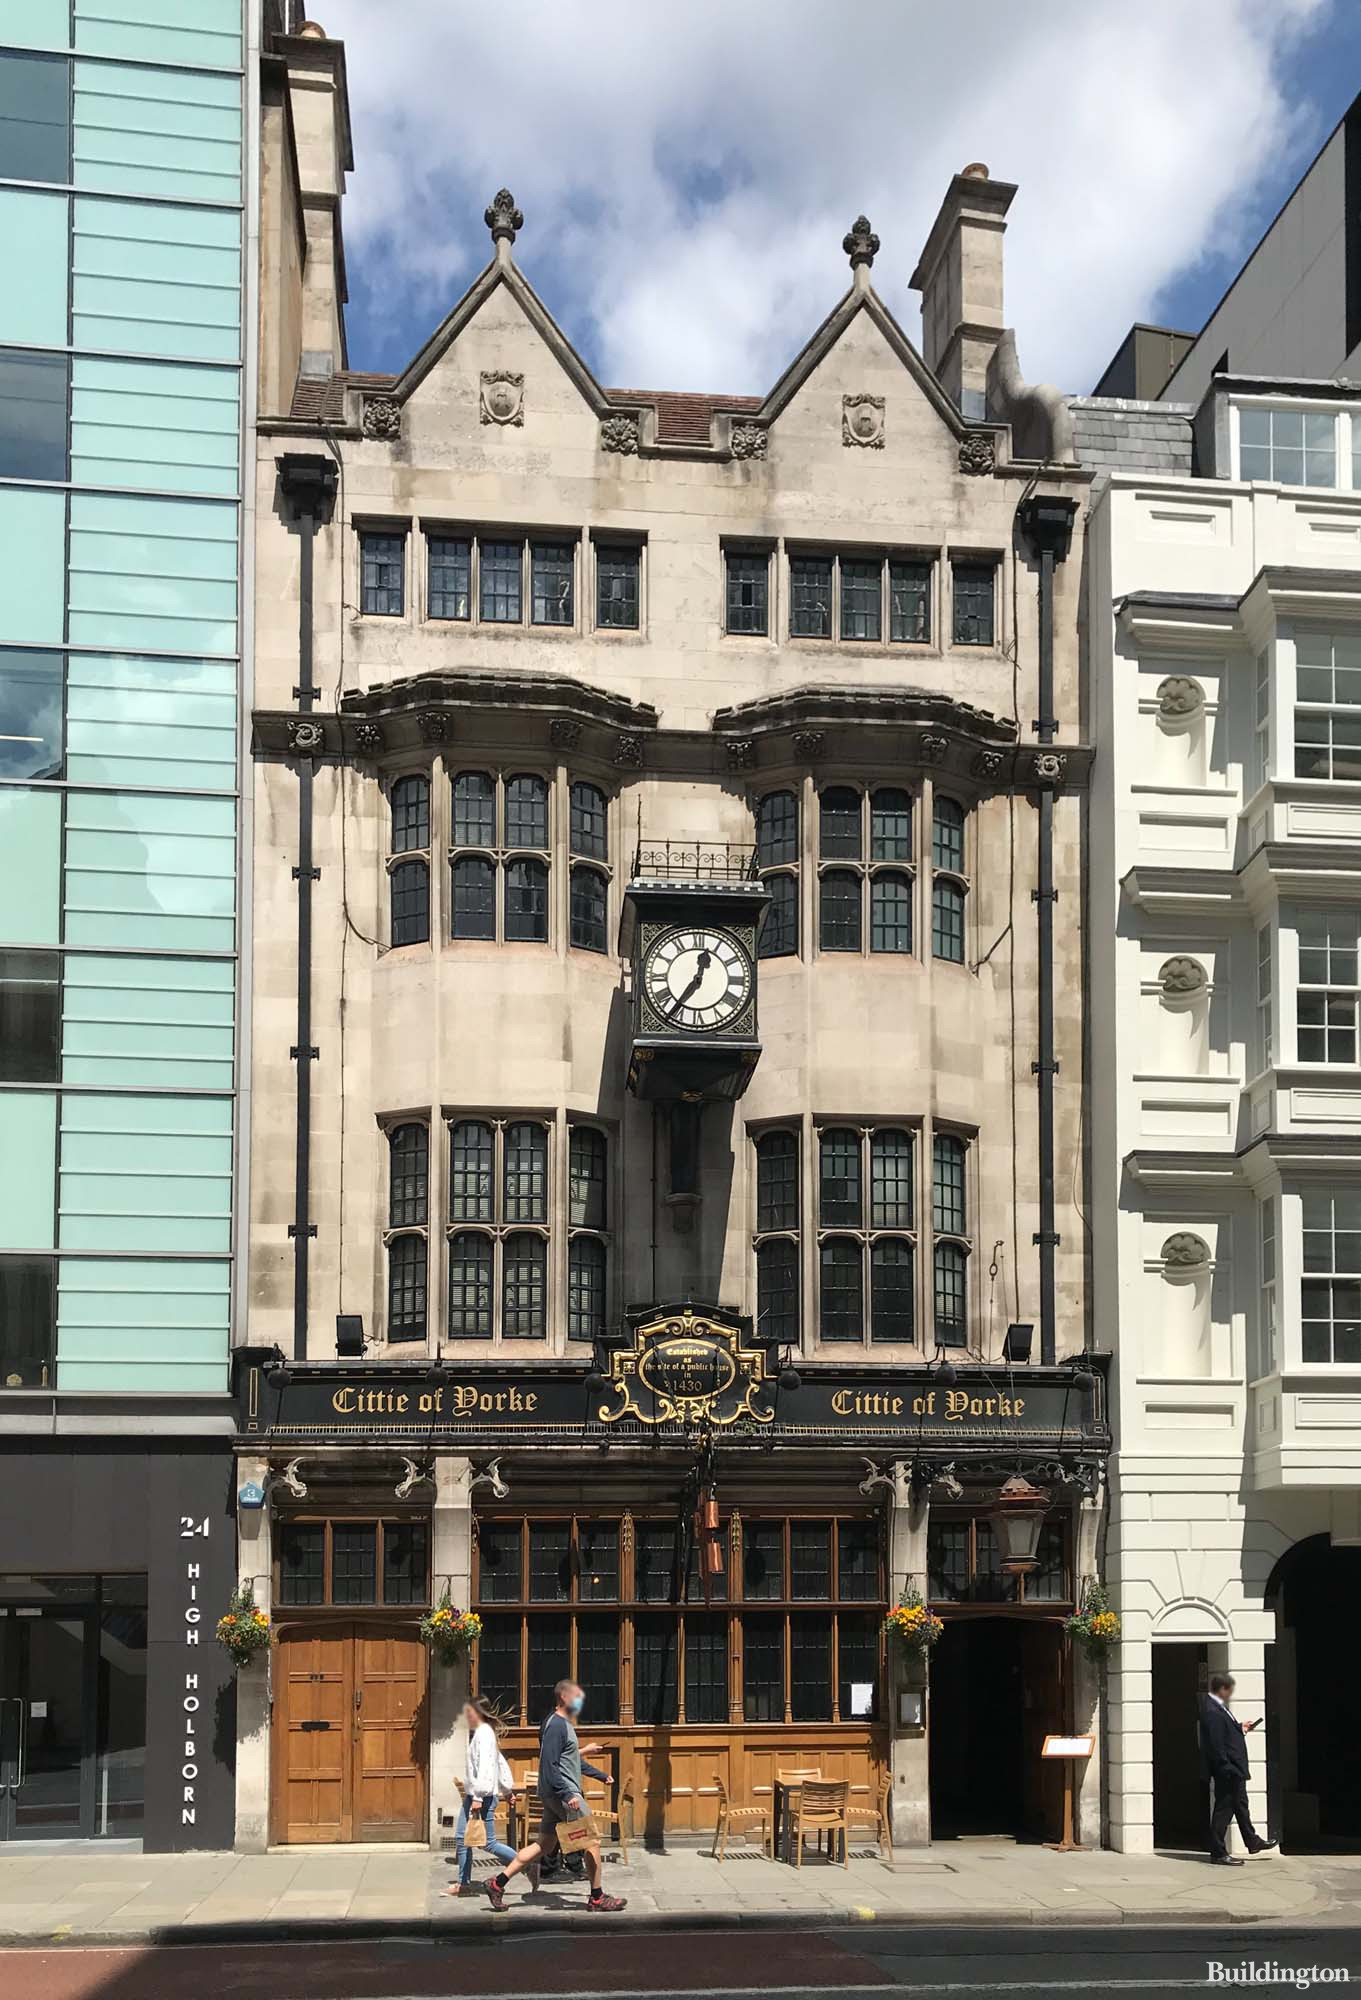 Cittie of York public house in Holborn, London WC1.